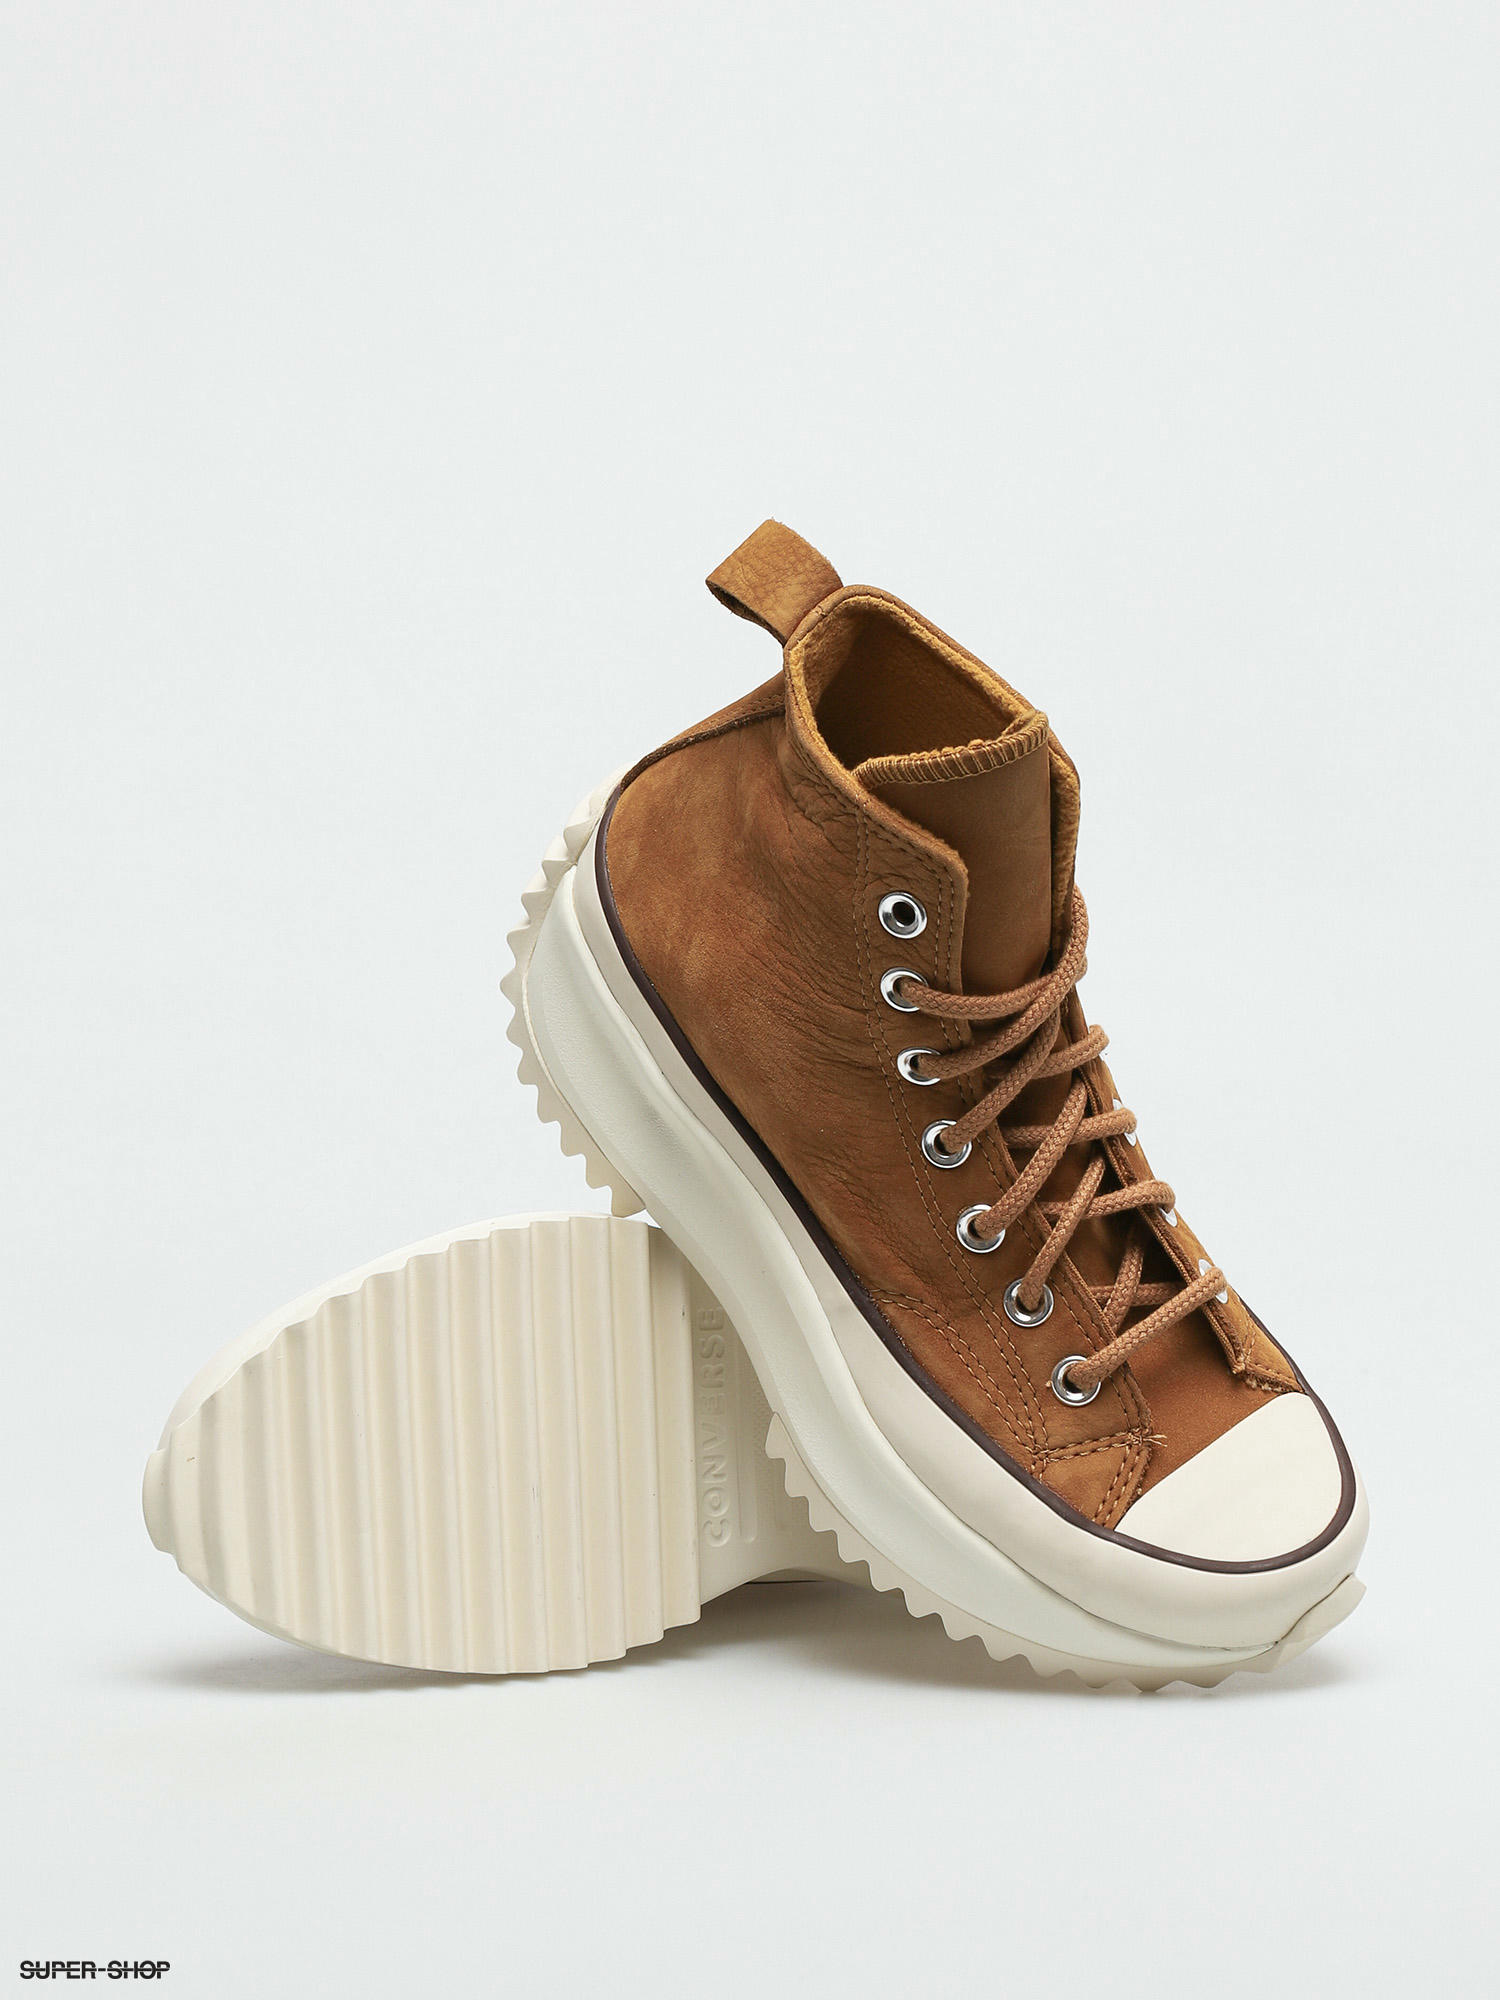 Converse Run Star Hike Shoes (brown/olive)